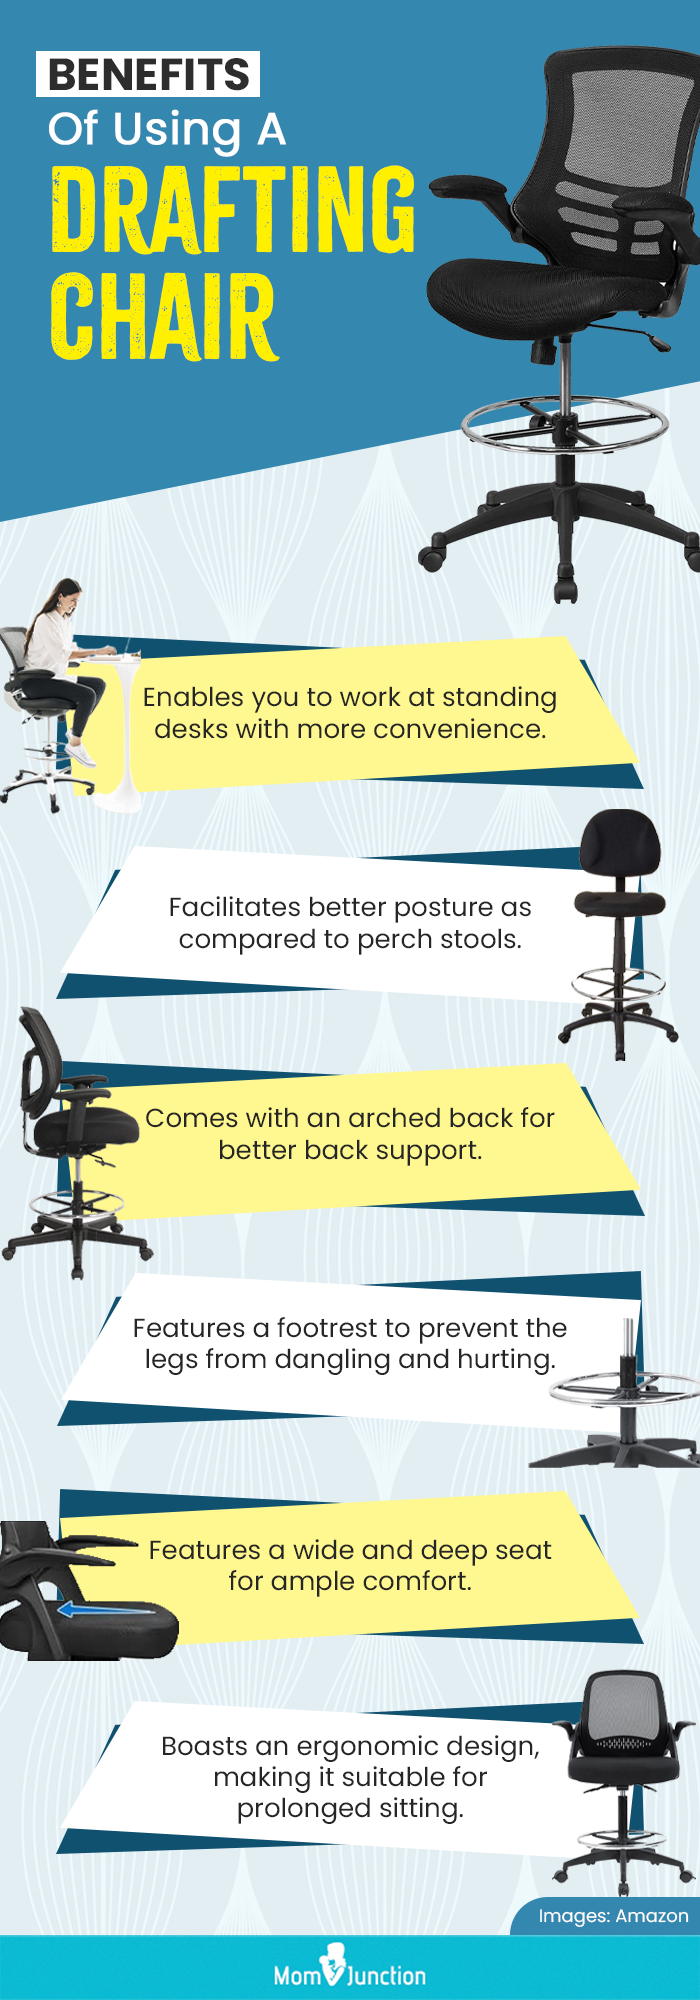 Benefits Of Using A Drafting Chair (infographic)